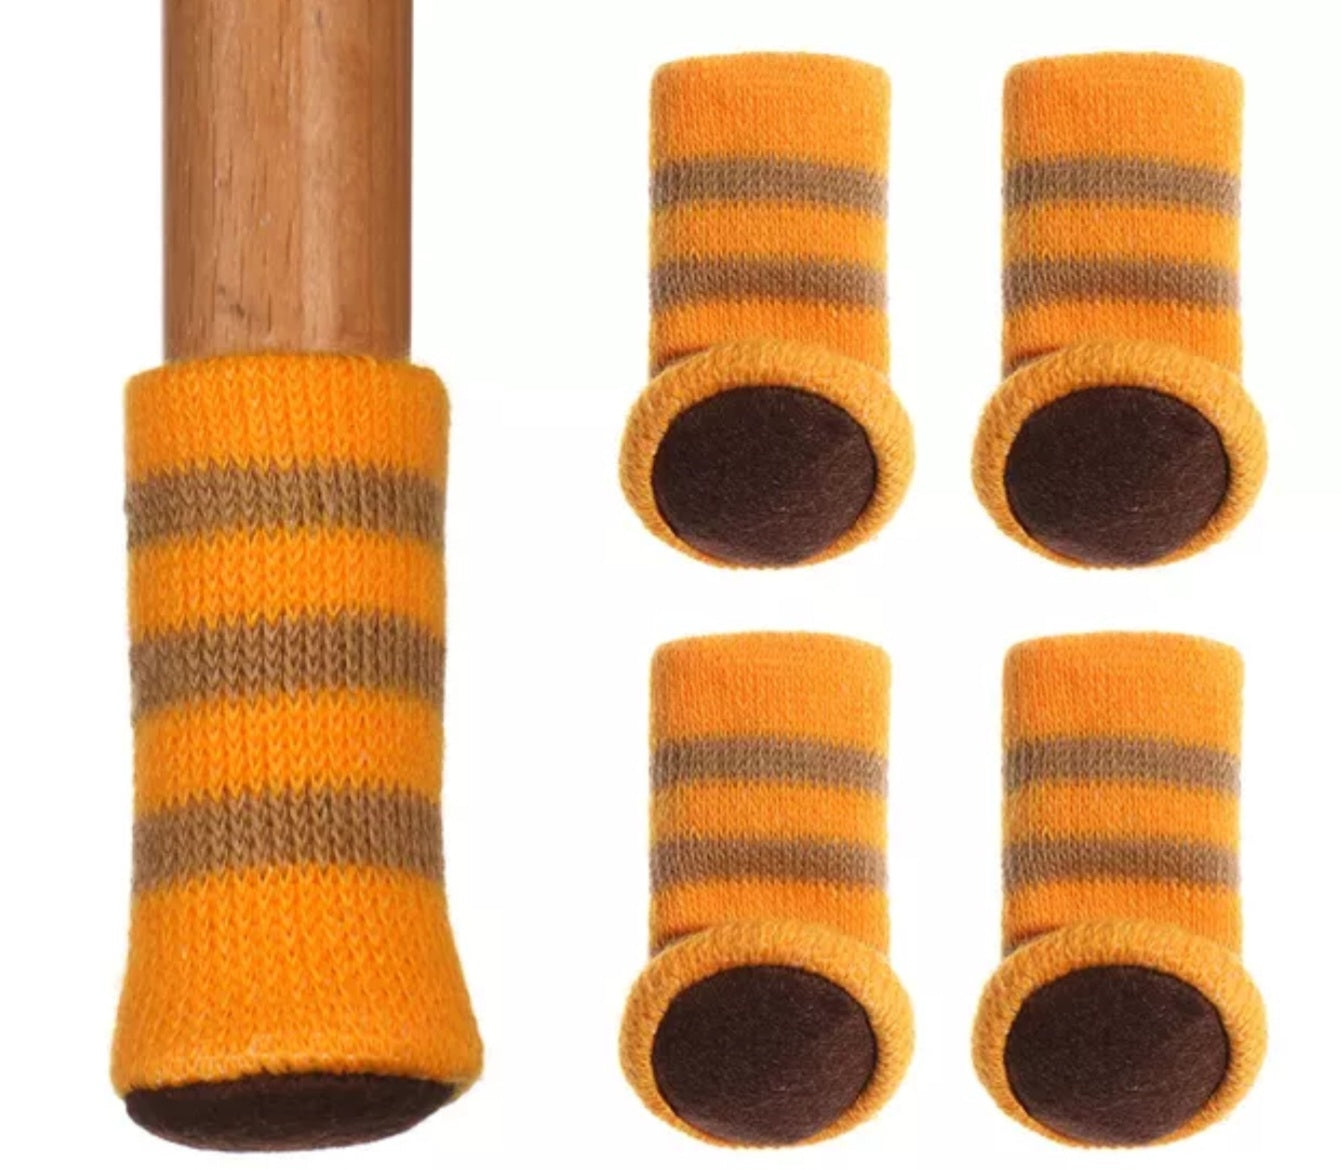 Chair and table leg socks scratch protection two colored set of 4 